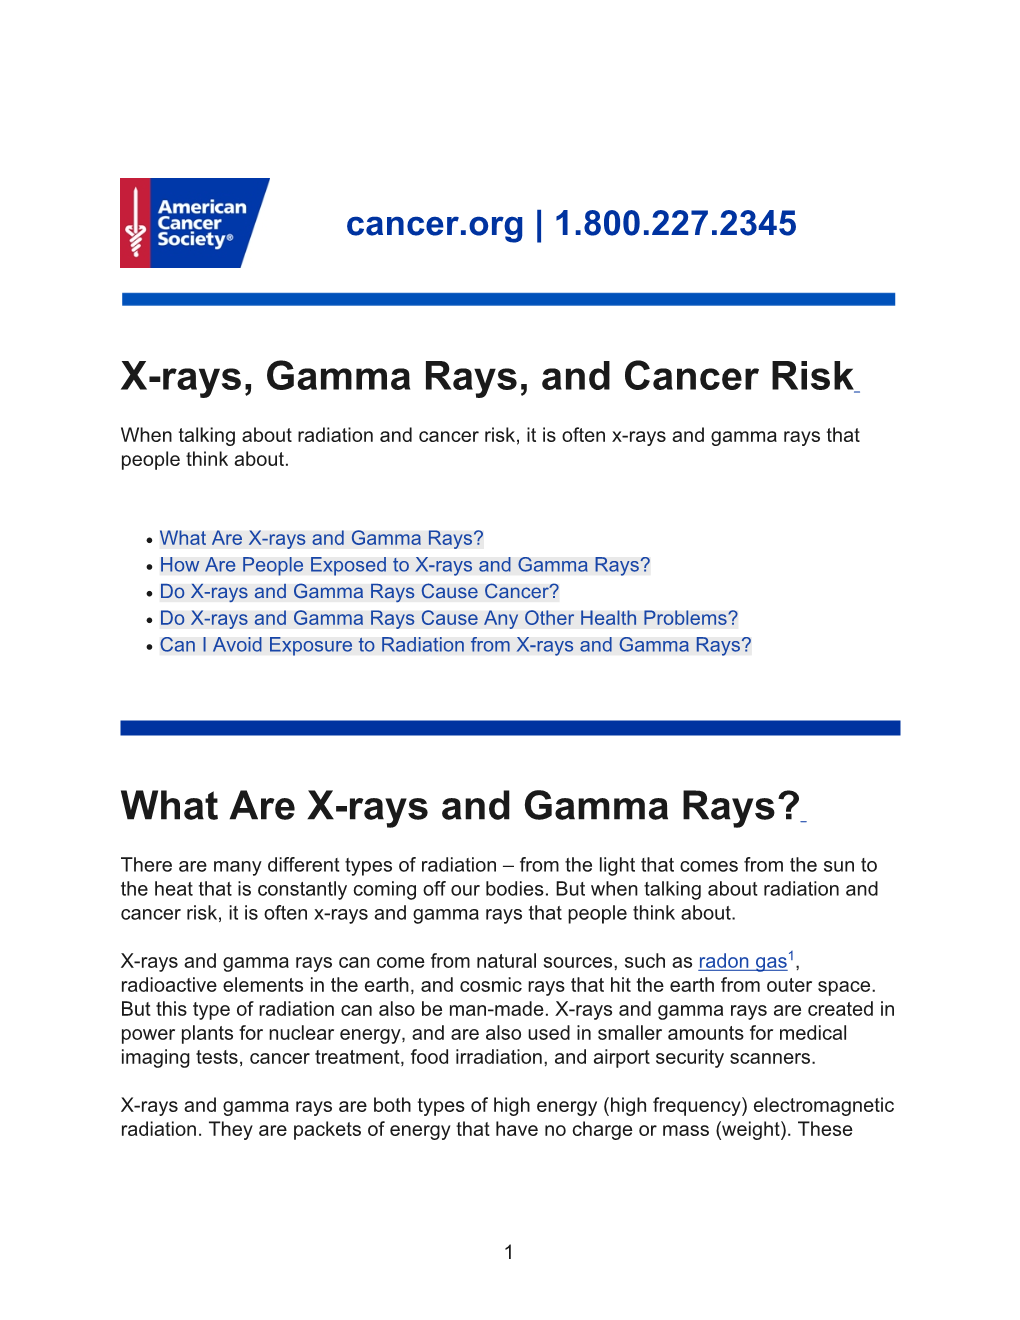 X-Rays, Gamma Rays, and Cancer Risk What Are X-Rays and Gamma